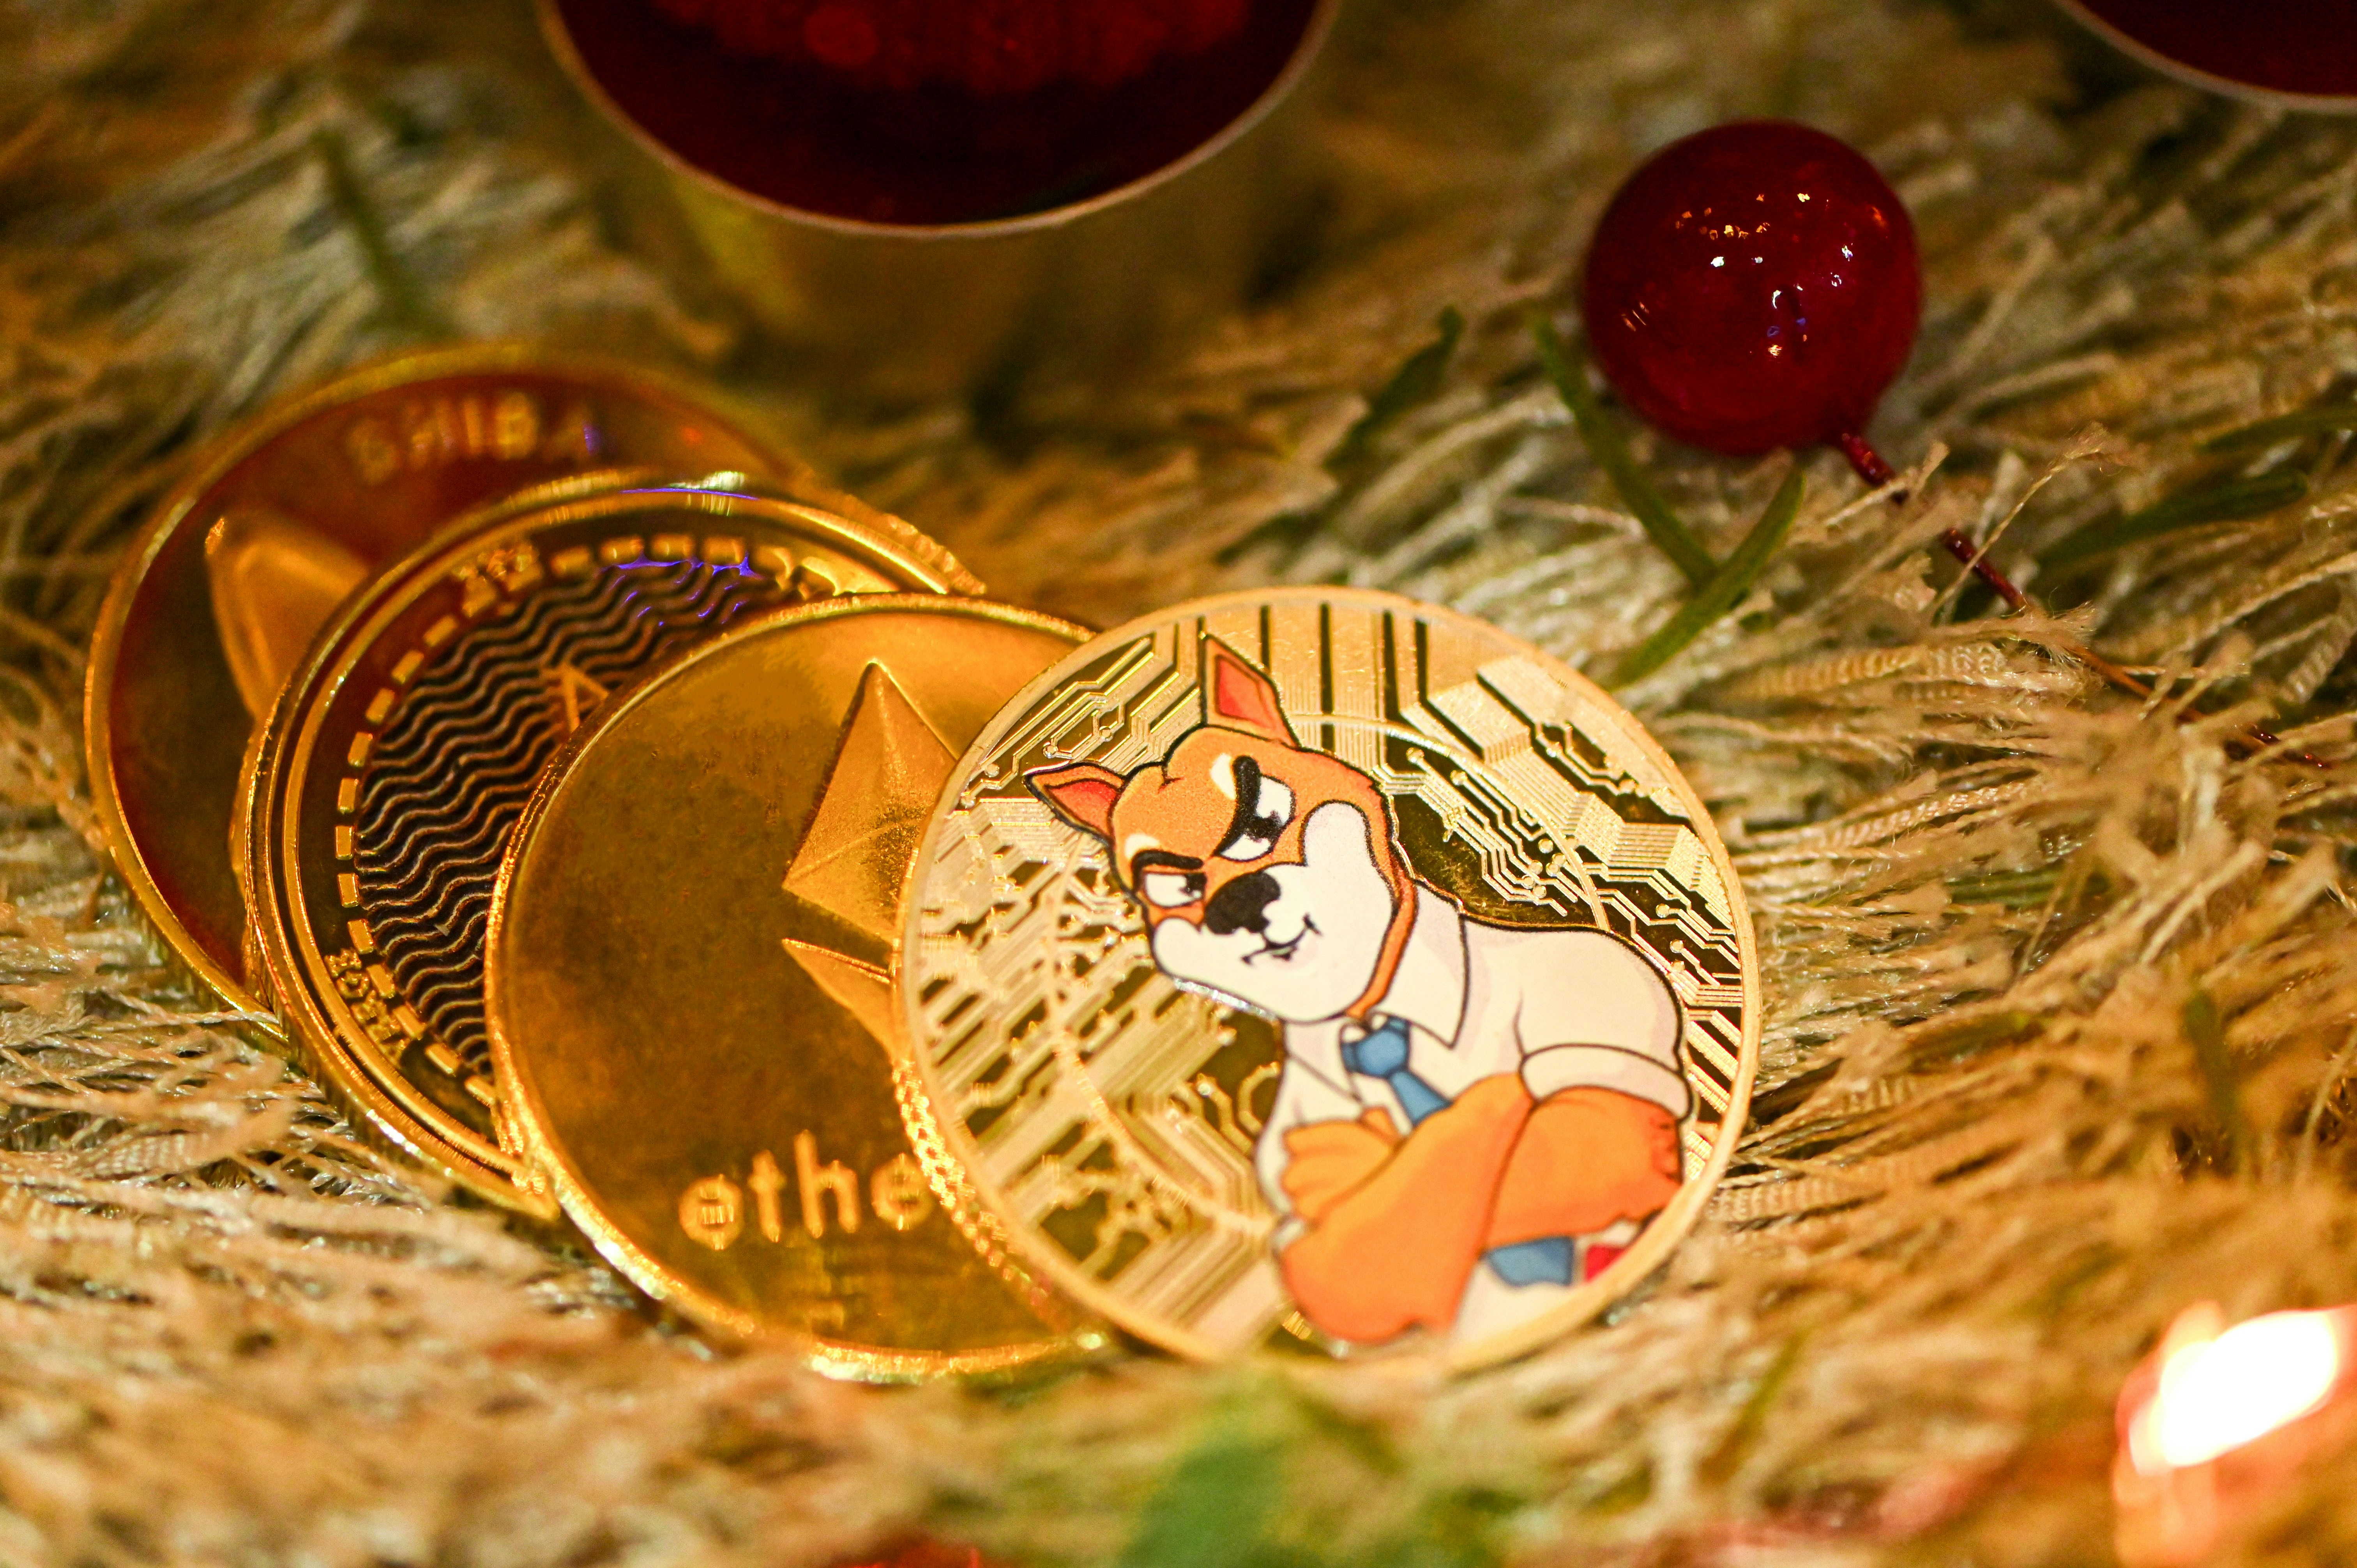 SHIB coin and Ethereum coin placed on a carpet